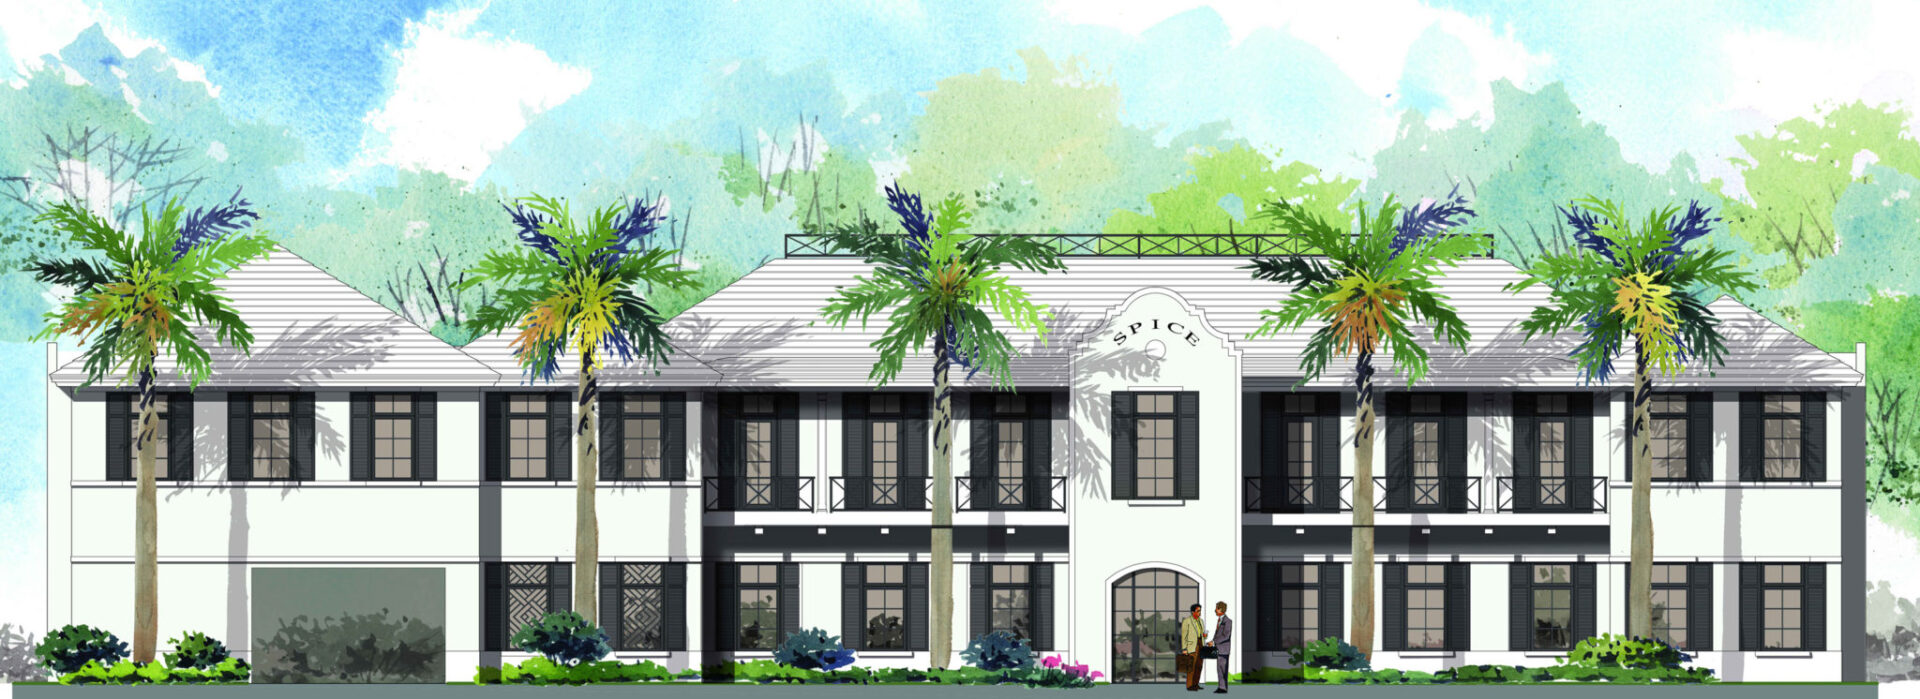 A drawing of the front of a building with palm trees.